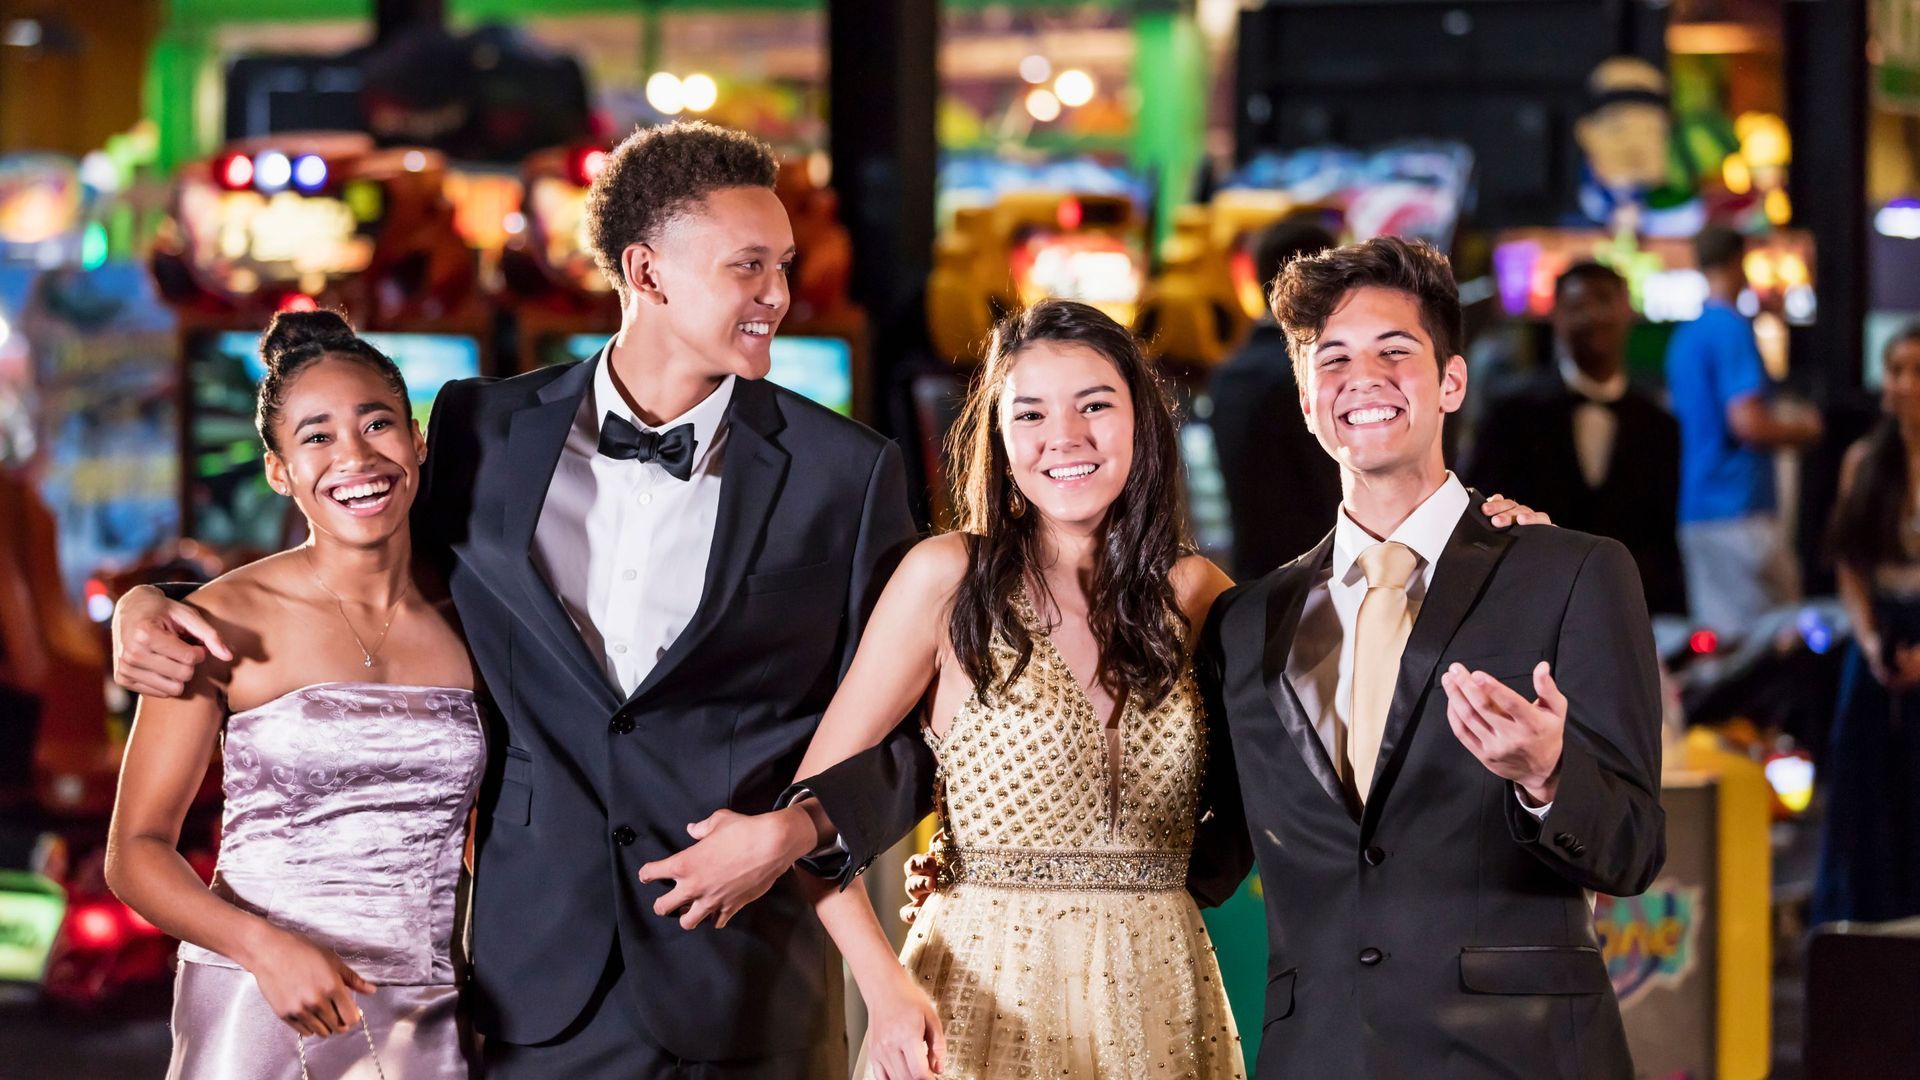 San Antonio Quinceañera celebrant shares laughter and joy with her friends.